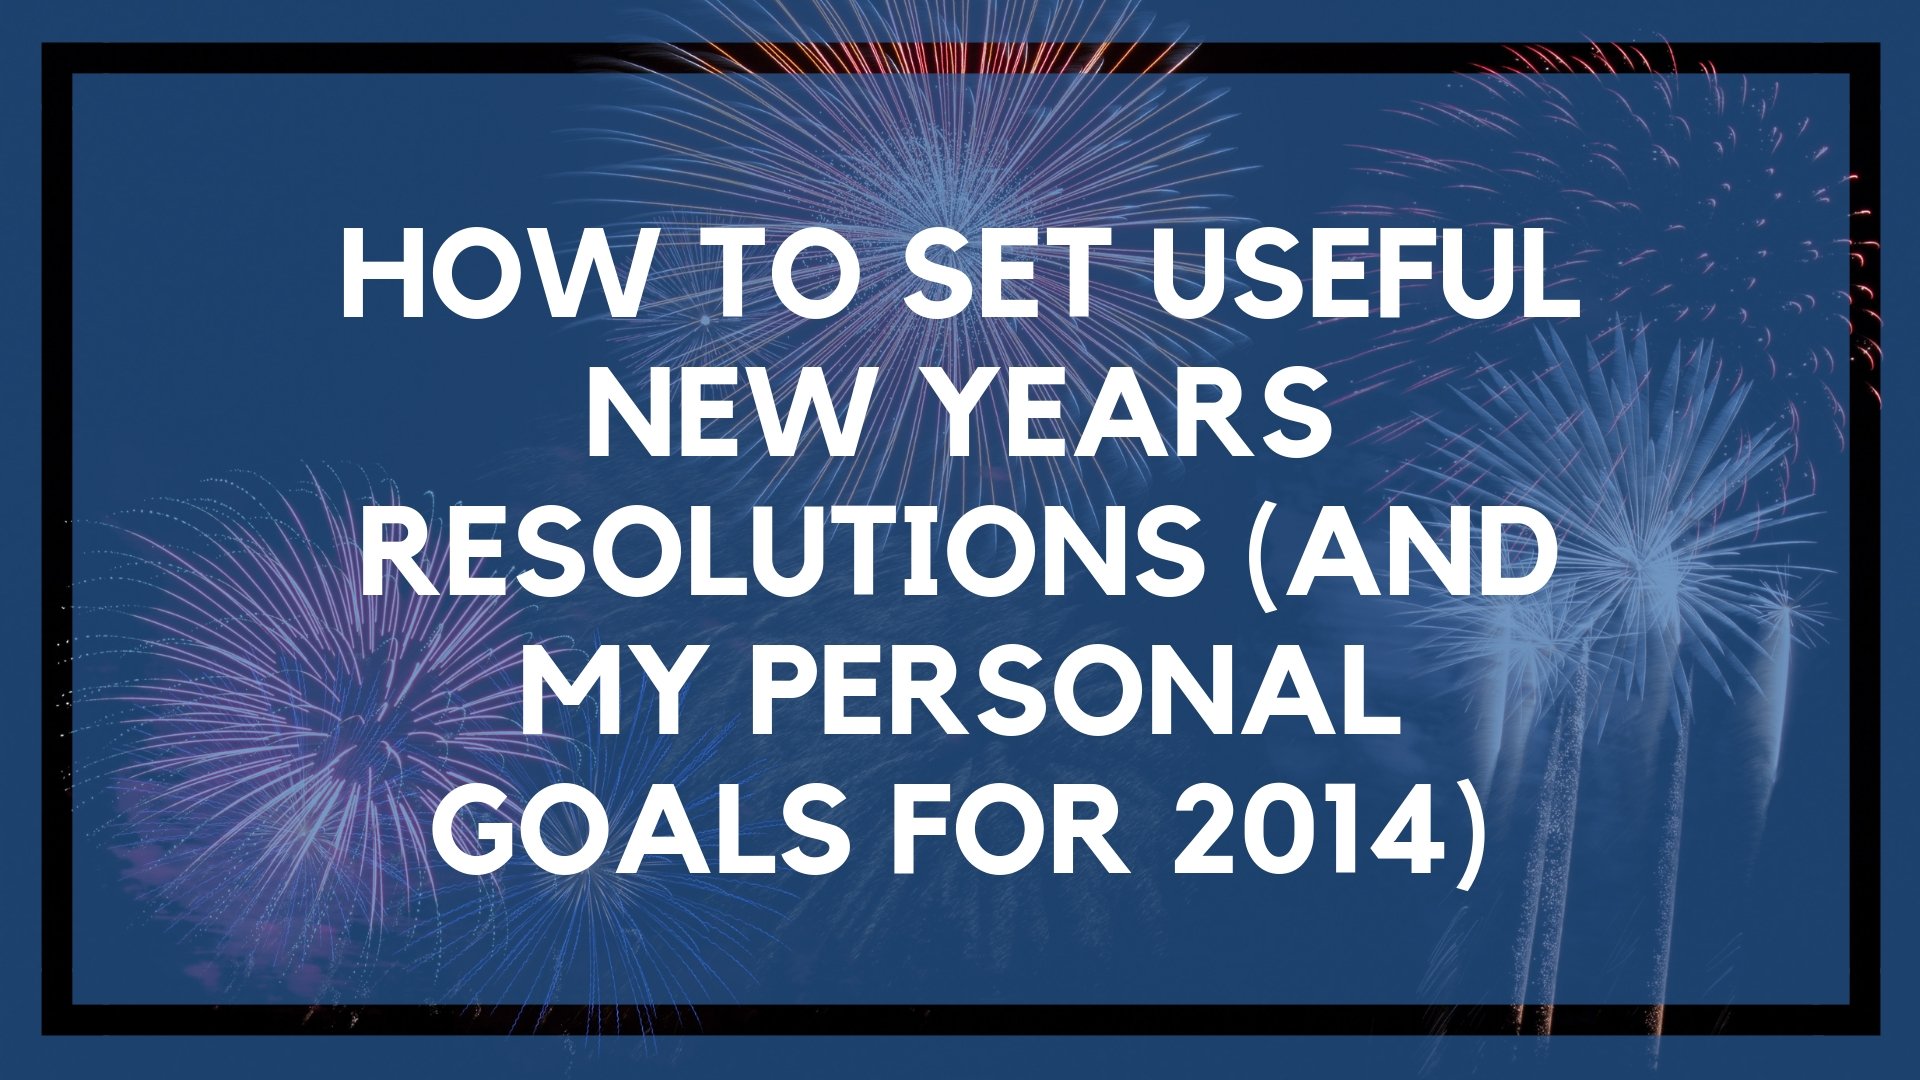 How to Set Useful New Years Resolutions (And My Personal Goals for 2014)